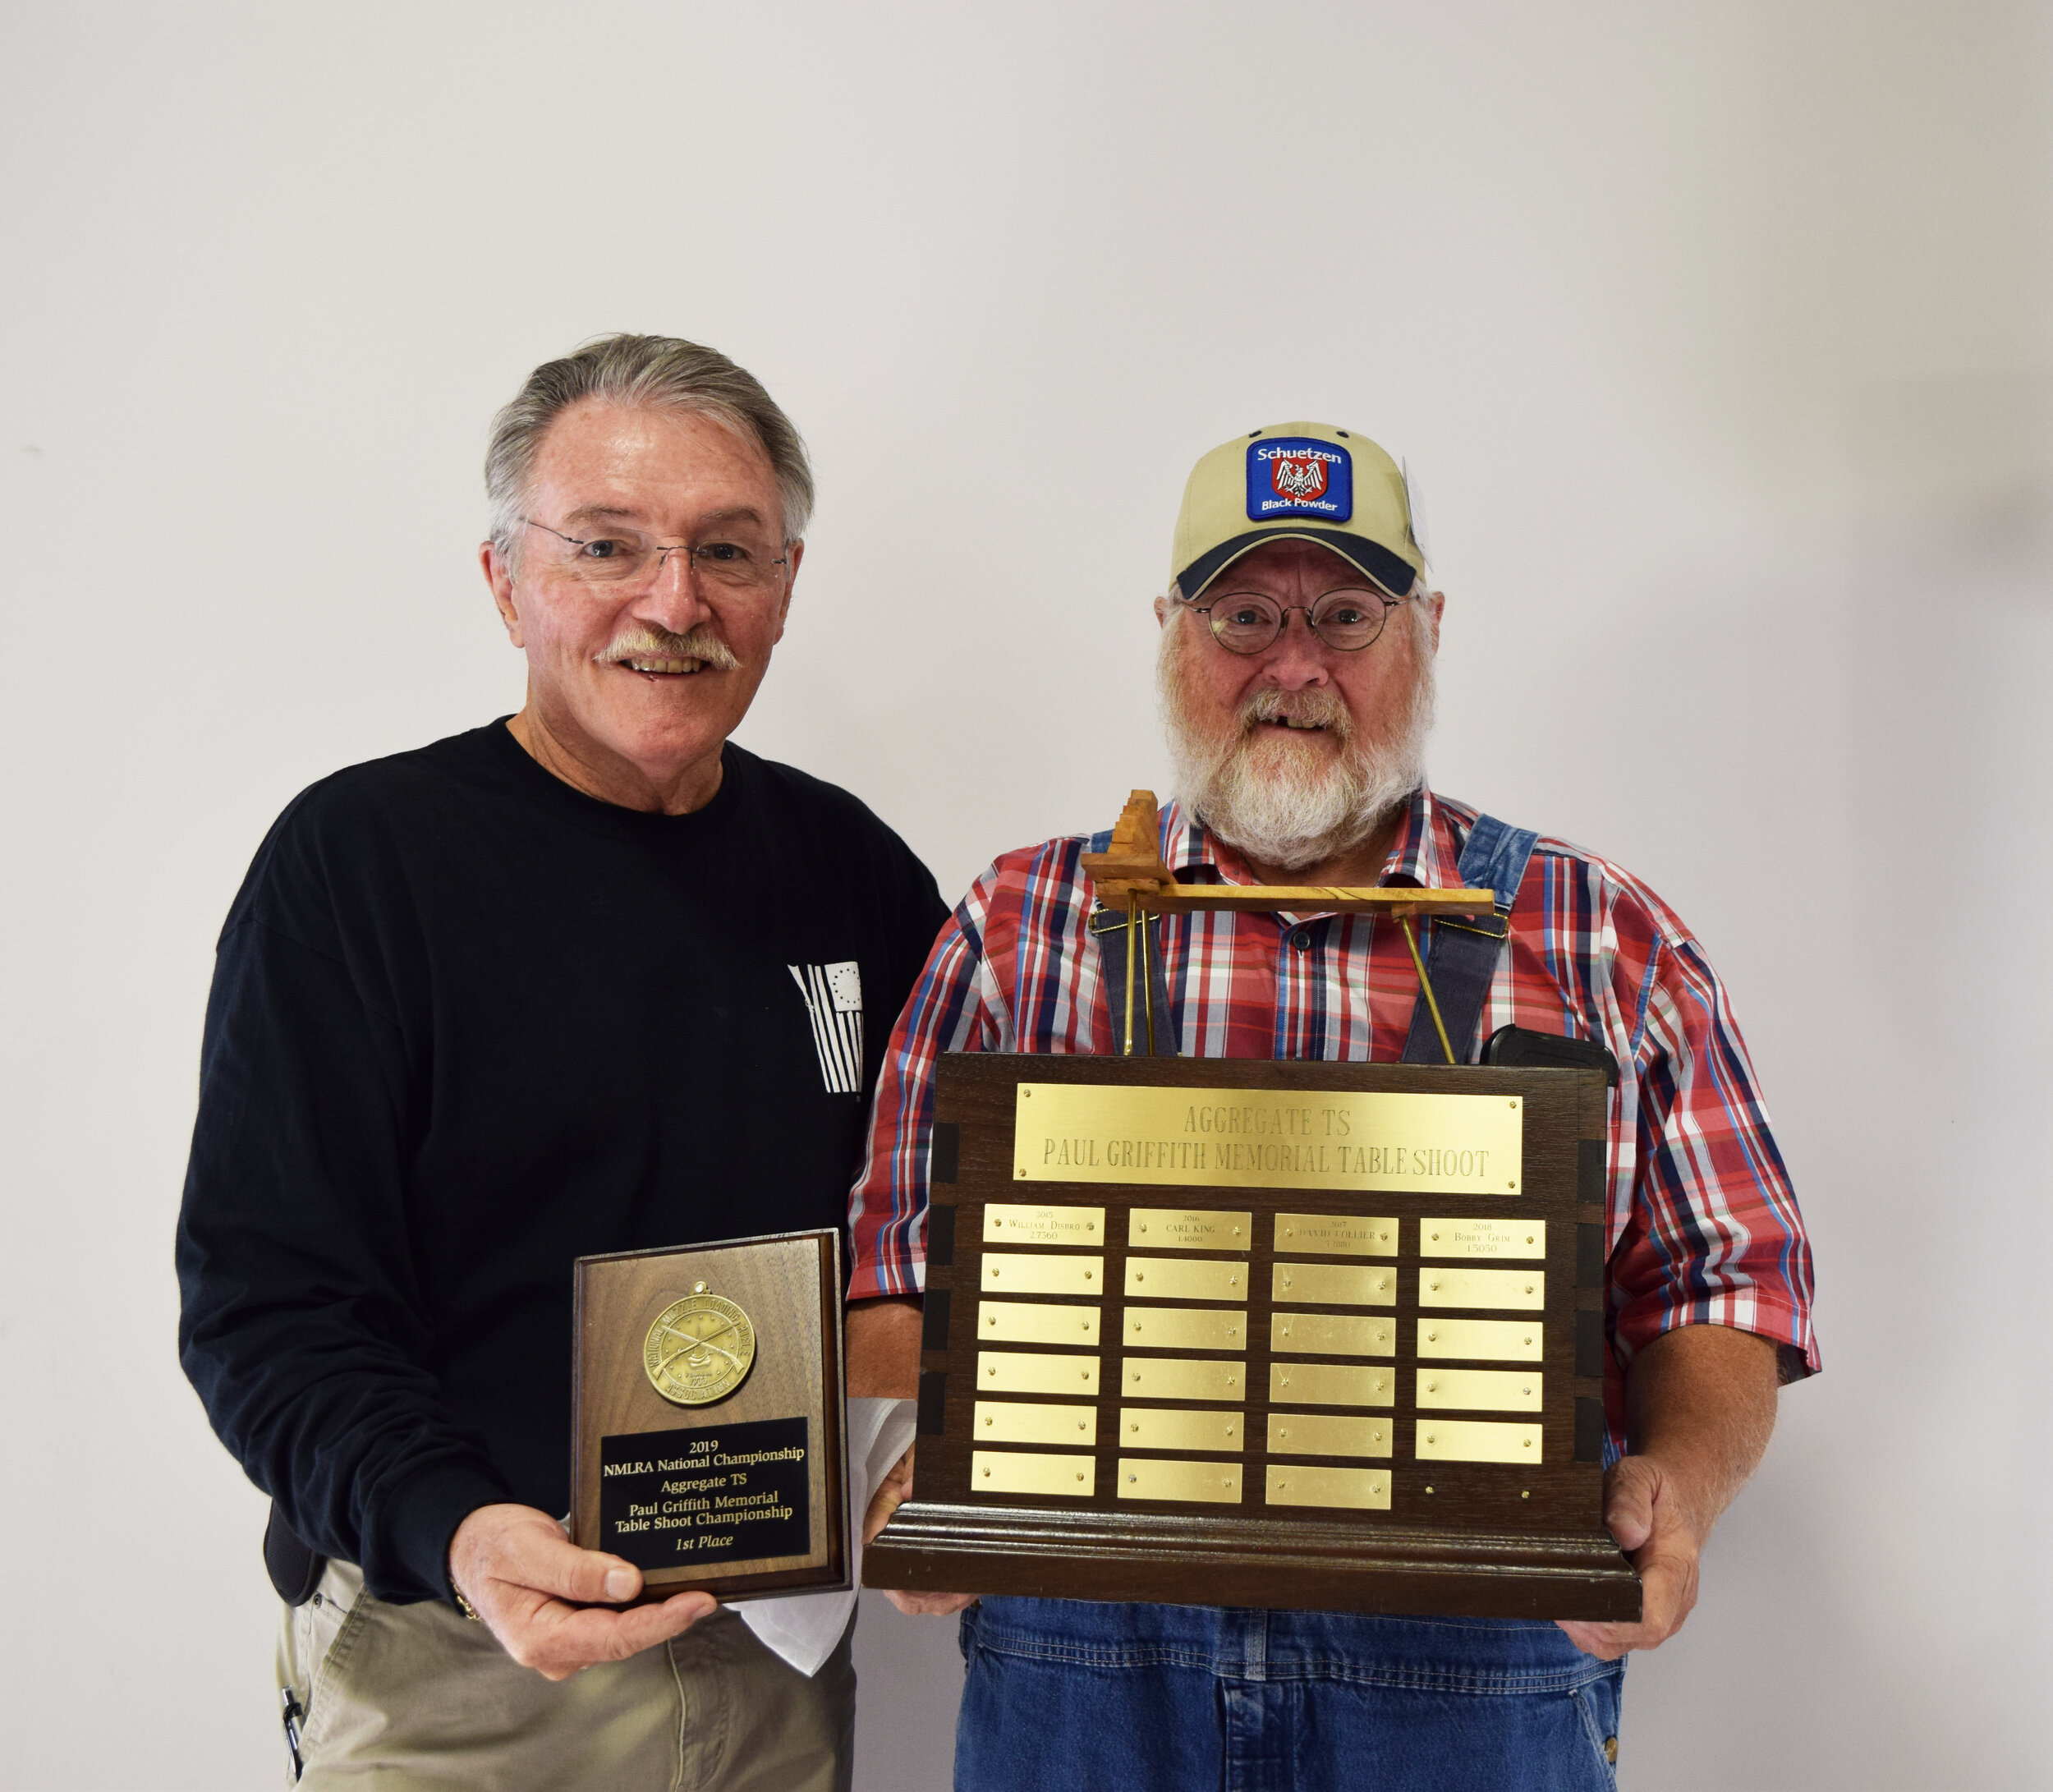  Carl King - Aggregate TS - Paul Griffith Memorial Table Shoot Championship Winner with NMLRA President Brent Steele - Carl also sat a new record score with this aggregate. 